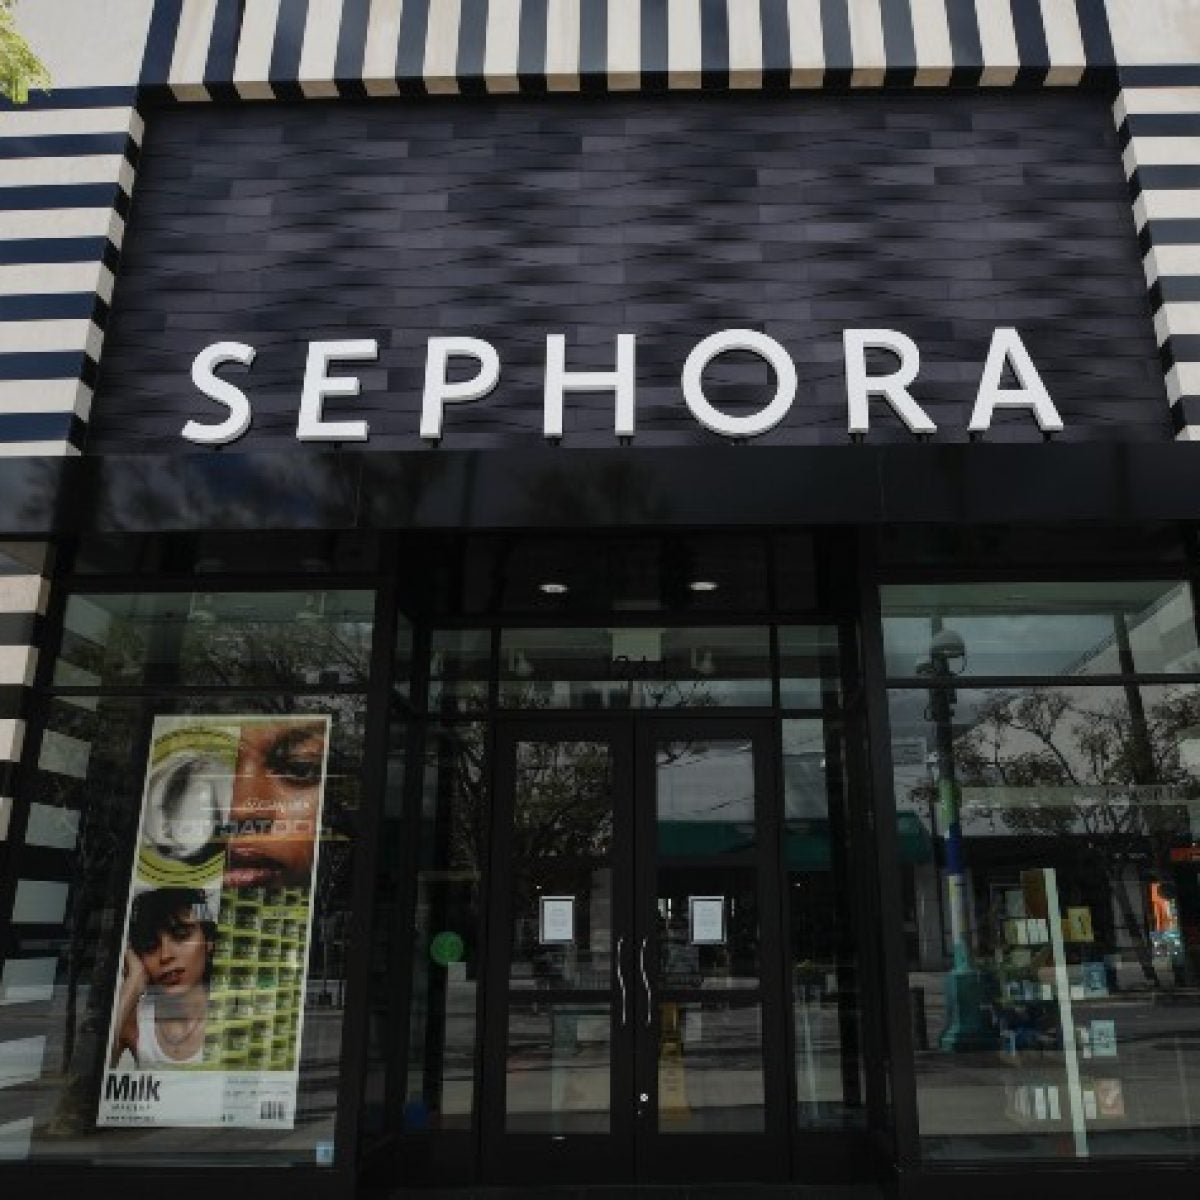 Exclusive: Inside Sephora’s Mass Layoffs And Full COVID-19 Response Plan